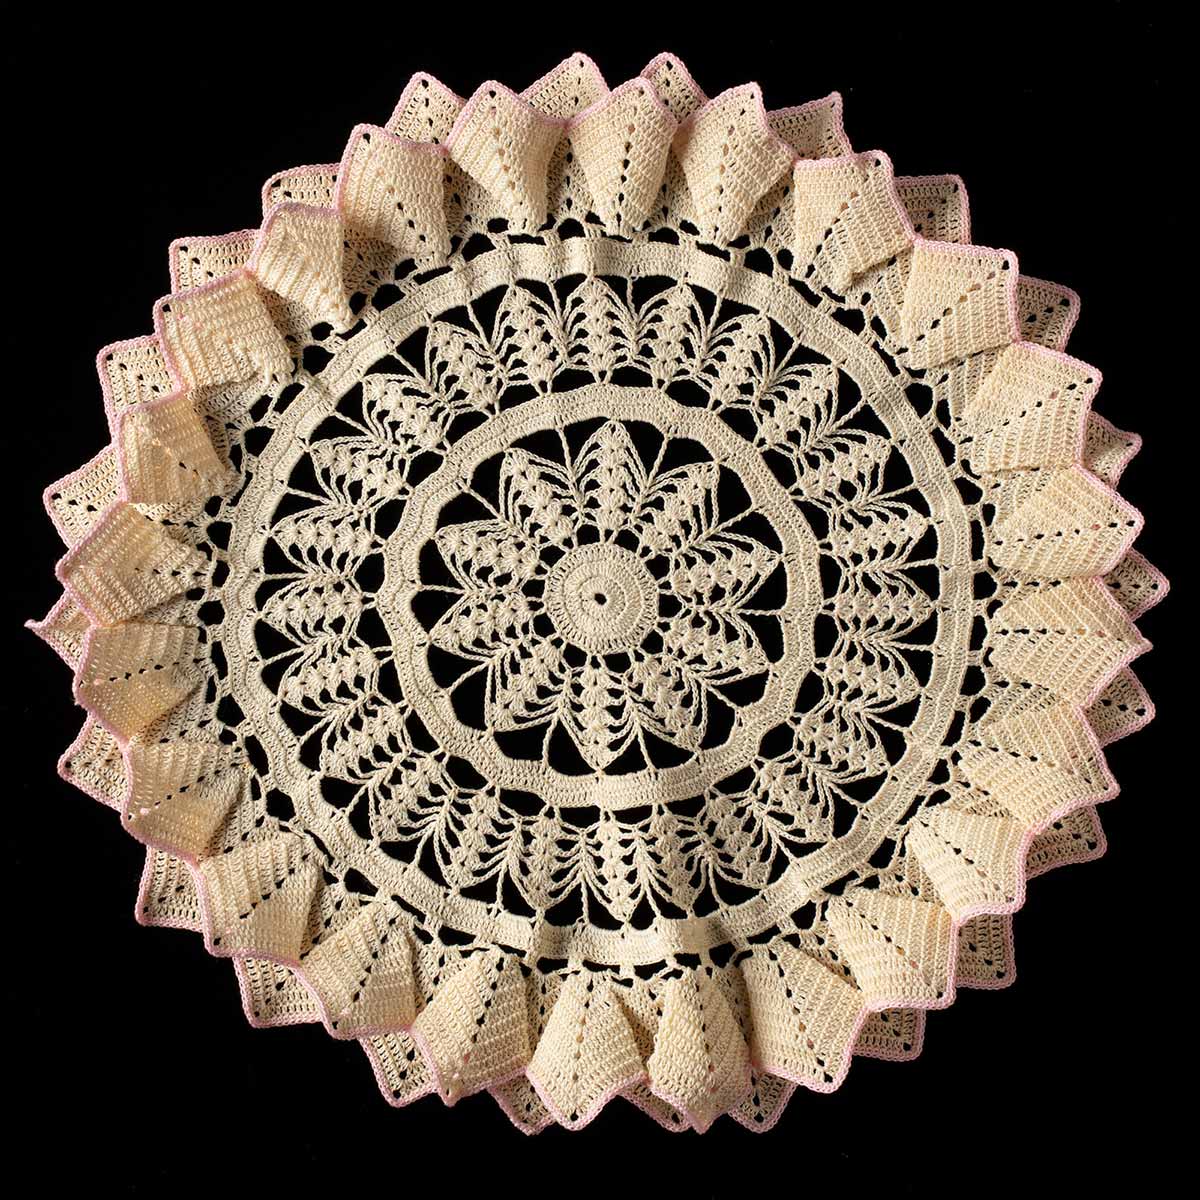 Circular off-white crocheted doily with three-dimensional edges creating a frill-like effect on a black background. The frills are edged in light pink thread. The centre of the doily is circular, with triangular crocheted designs in concentric circles creating a sunflower effect. - click to view larger image